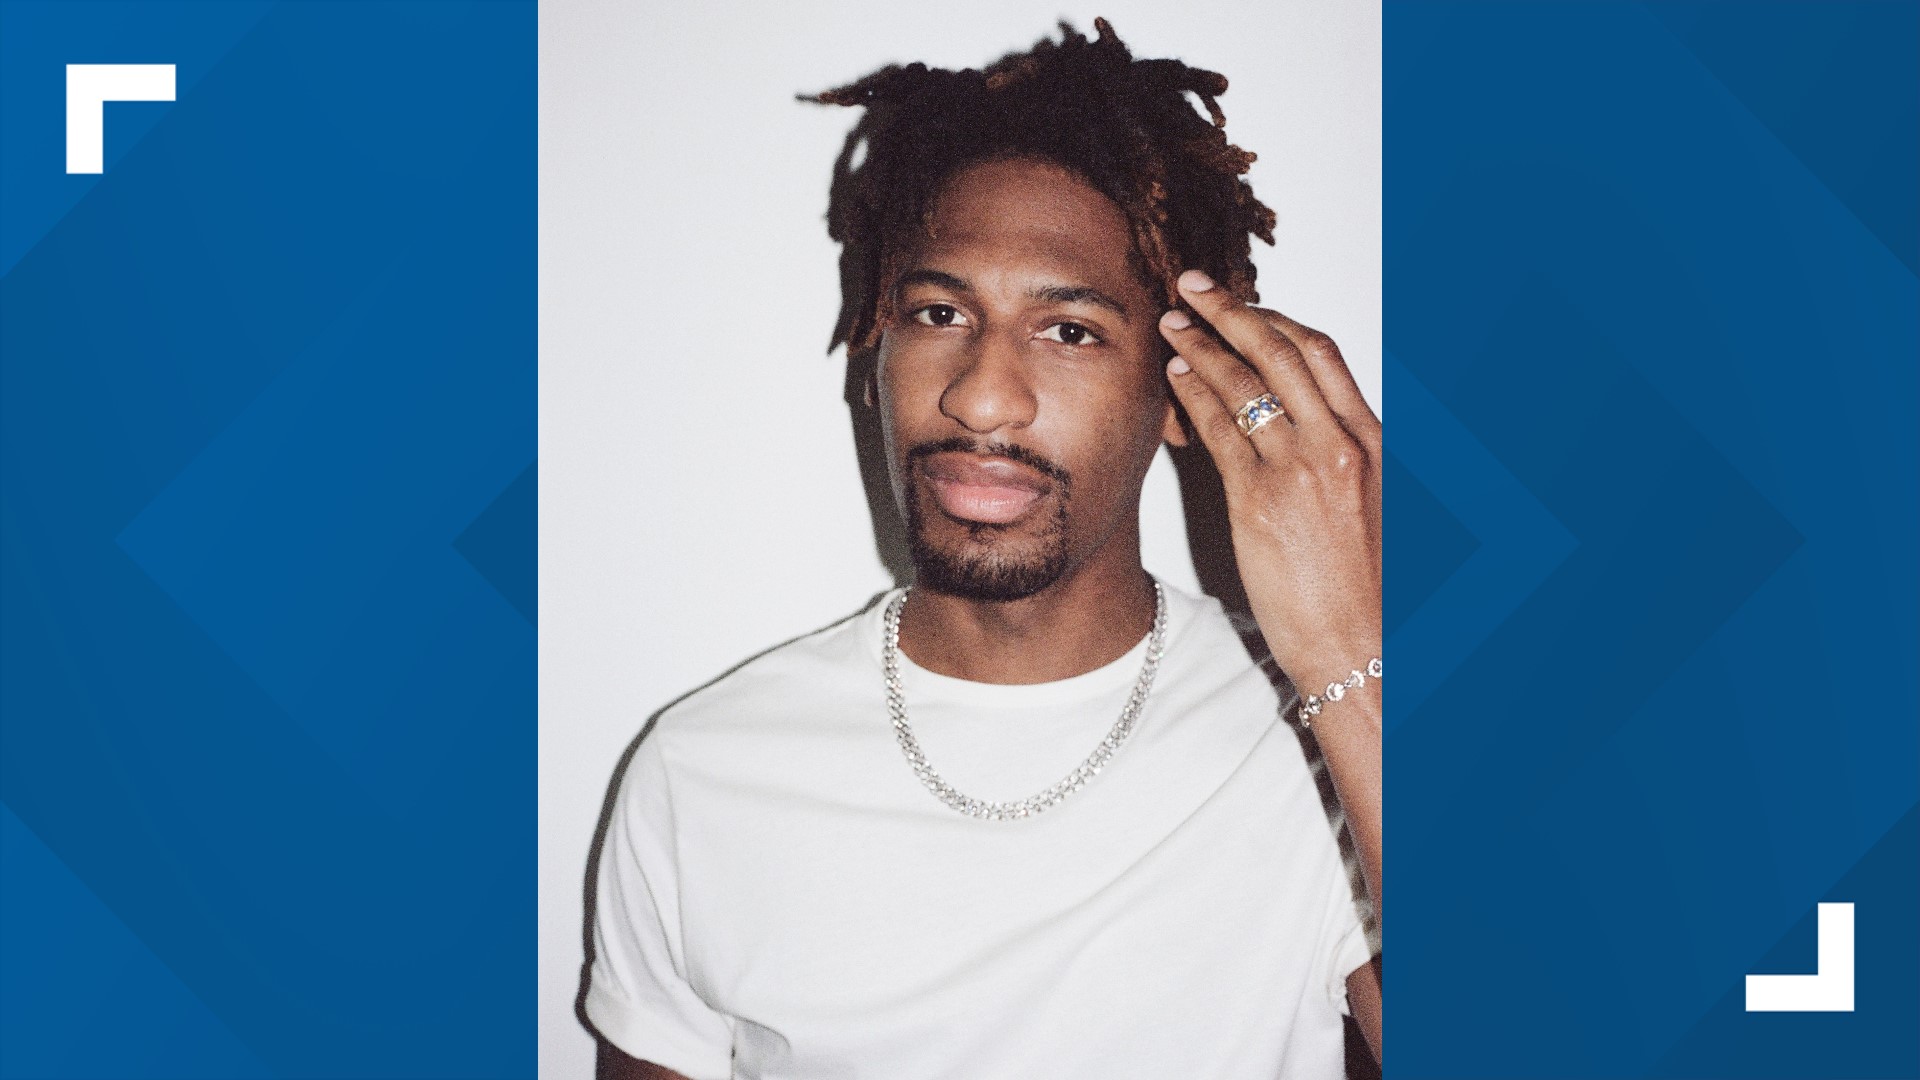 Grammy-winning singer, songwriter and bandleader Jon Batiste will join the ProMusica Columbus Chamber Orchestra for a two-concert residency this May.